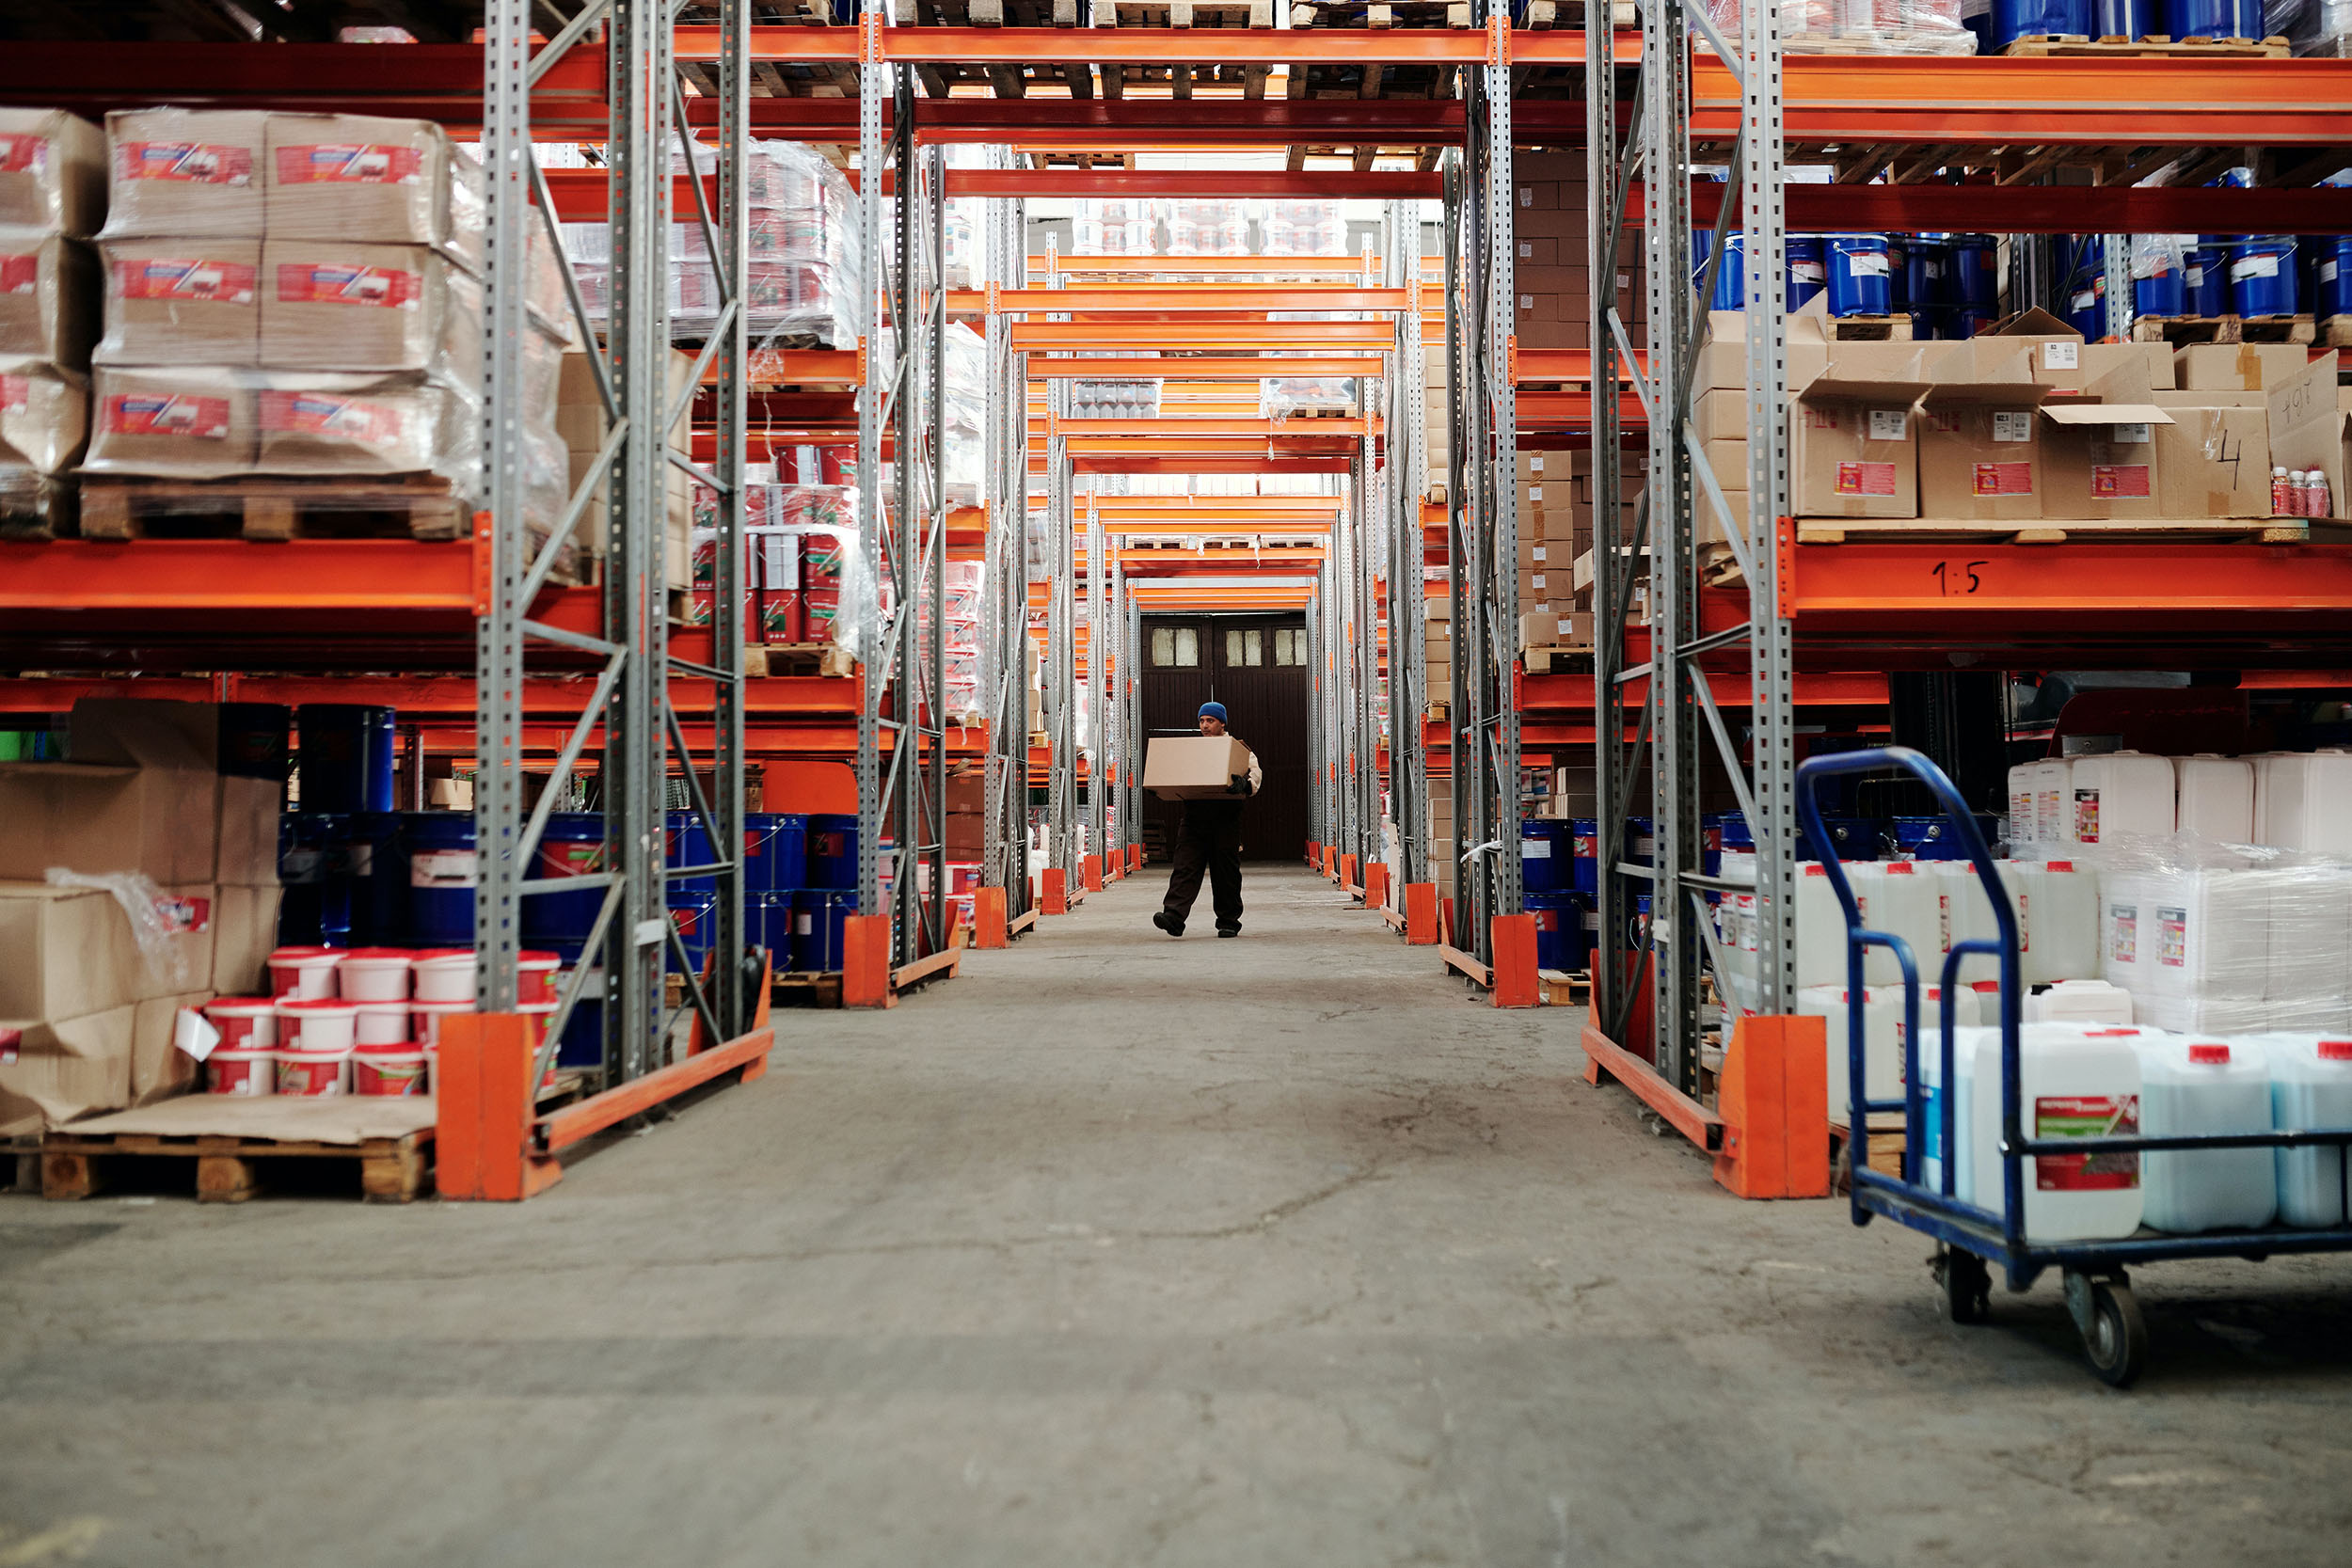 Man standing in aisle of warehouse carrying a box.